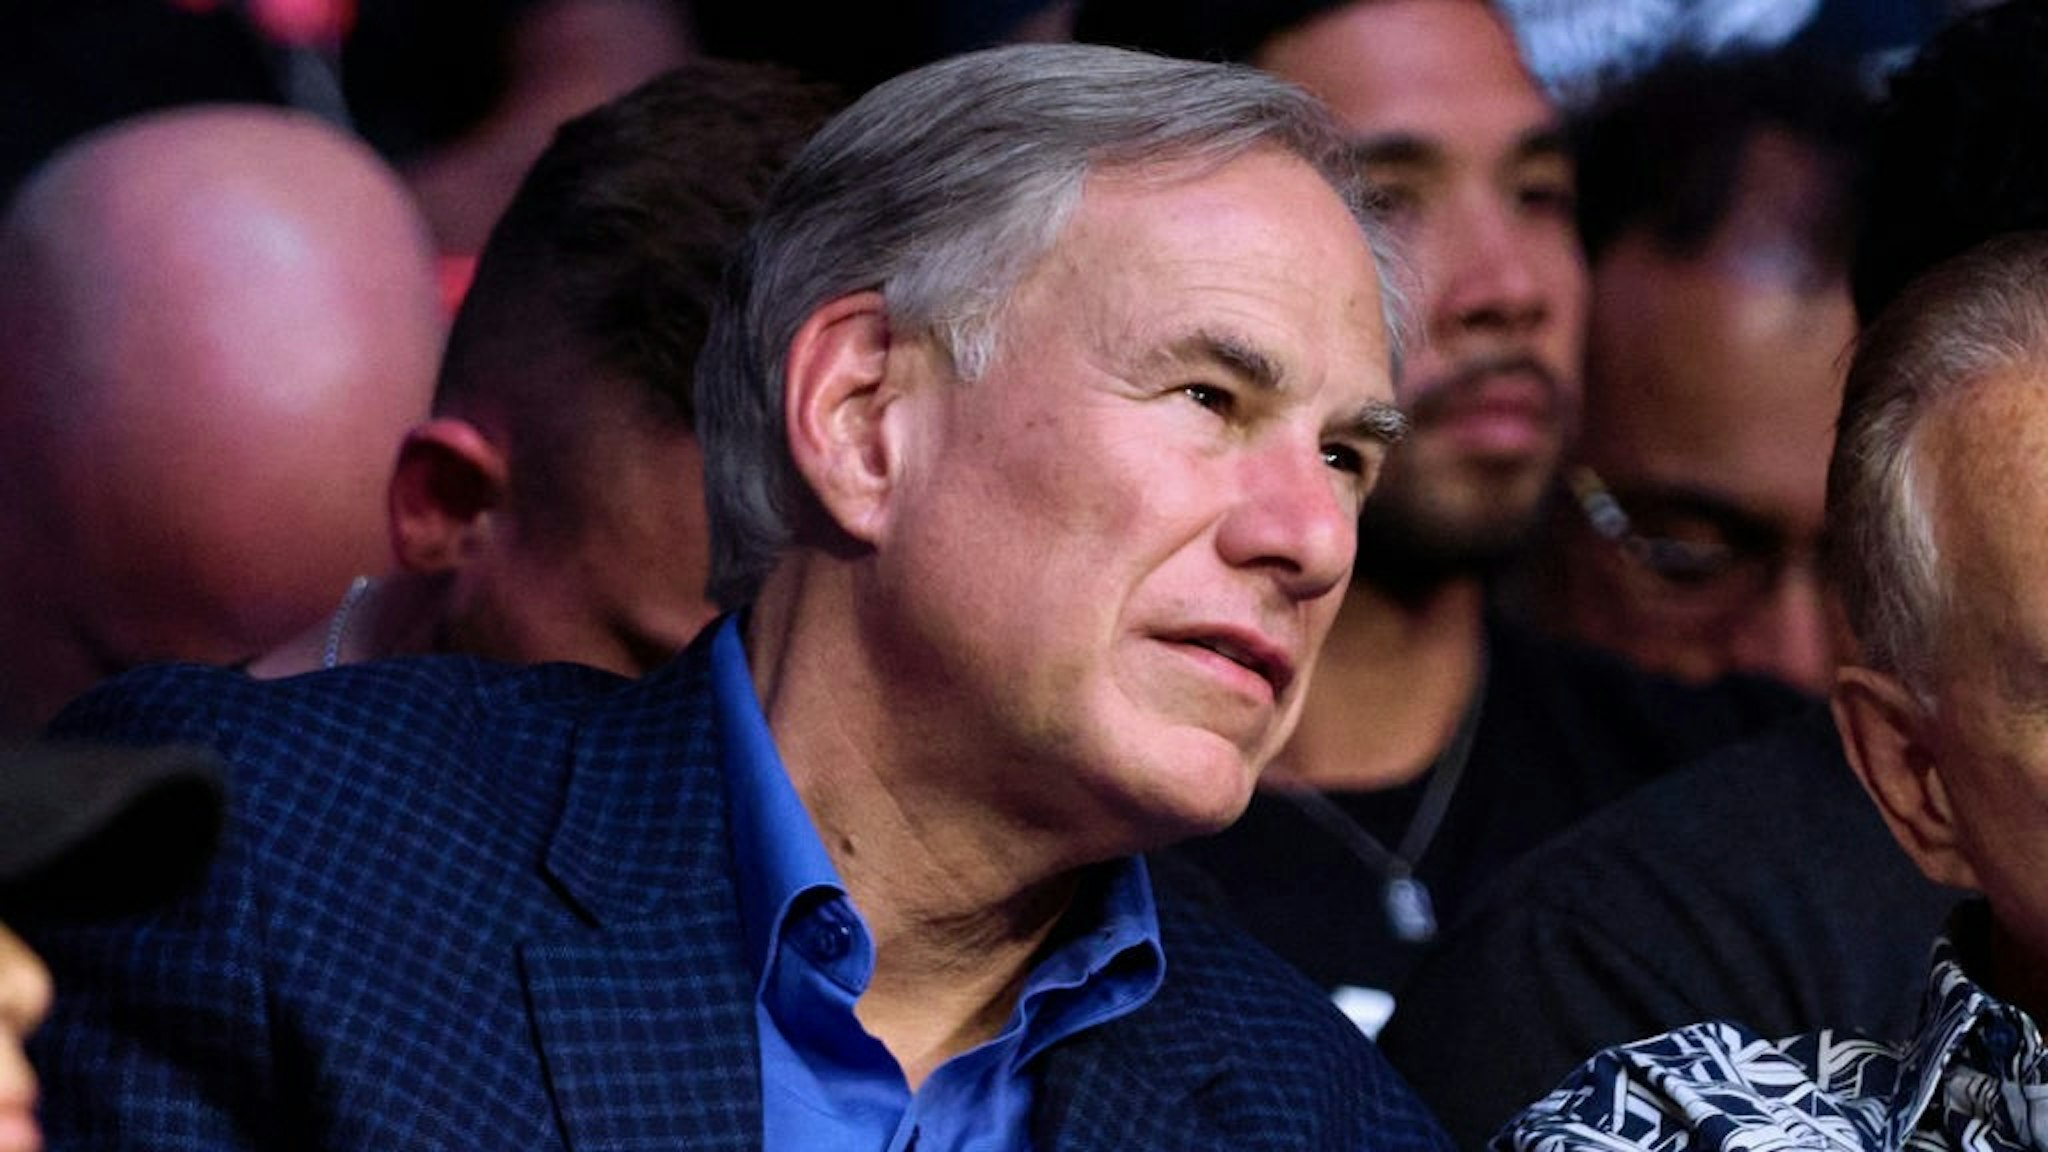 UFC 265: Lewis v Gane HOUSTON, TEXAS - AUGUST 07: Governor of Texas Greg Abbott is seen in attendance during the UFC 265 event at Toyota Center on August 07, 2021 in Houston, Texas. (Photo by Cooper Neill/Zuffa LLC) Cooper Neill / Contributor via Getty Images